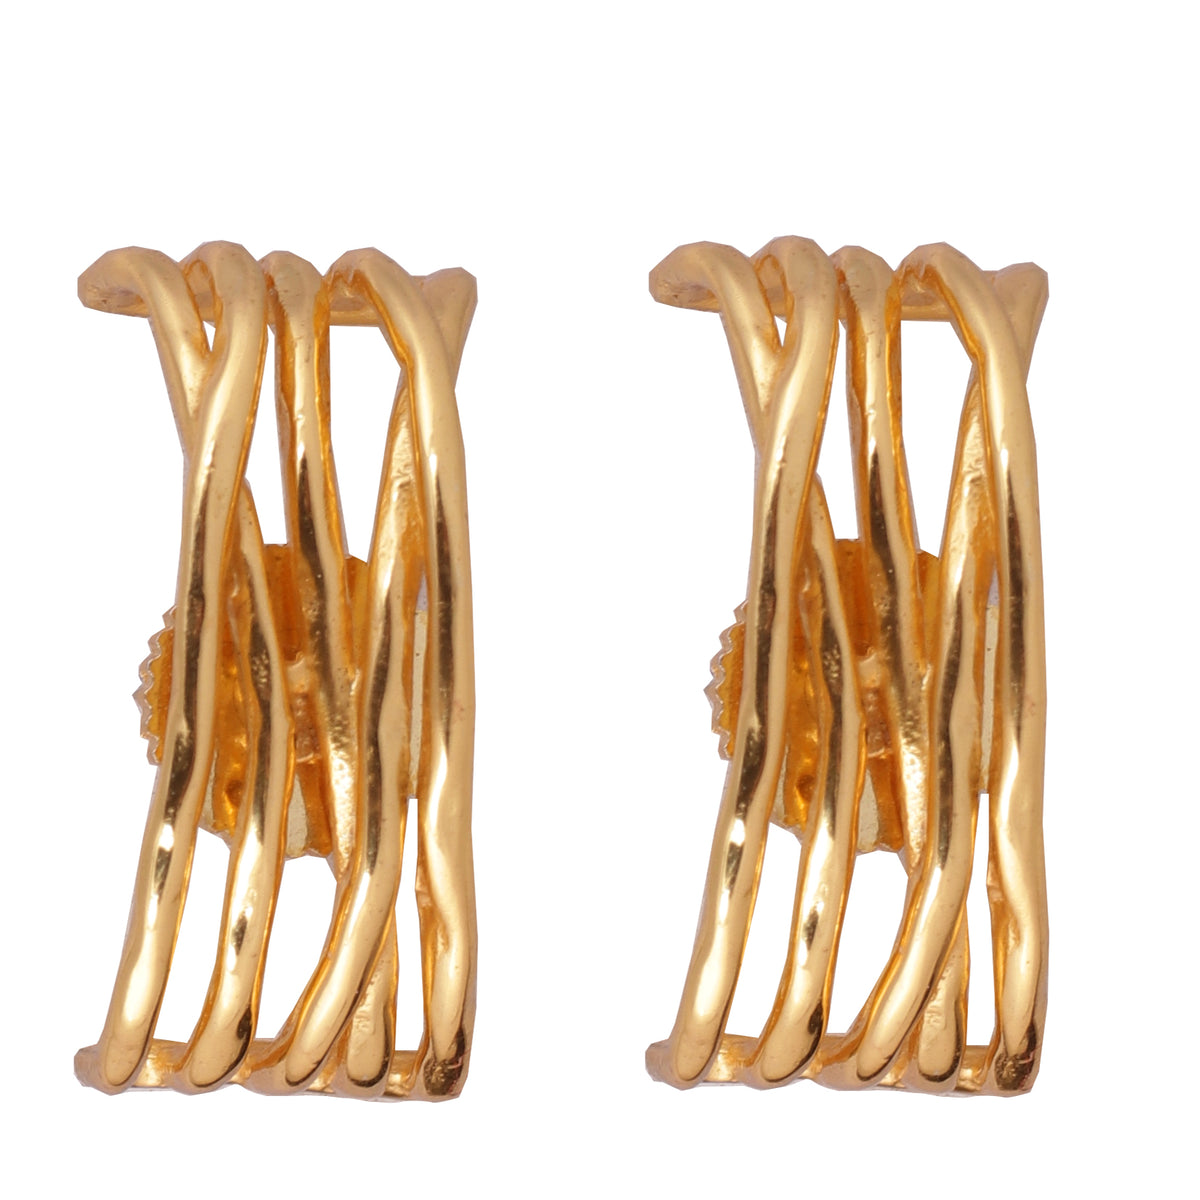 Wired effect ear studs  perfect for basic jewelry, available in 22k gold plated and silver finish.